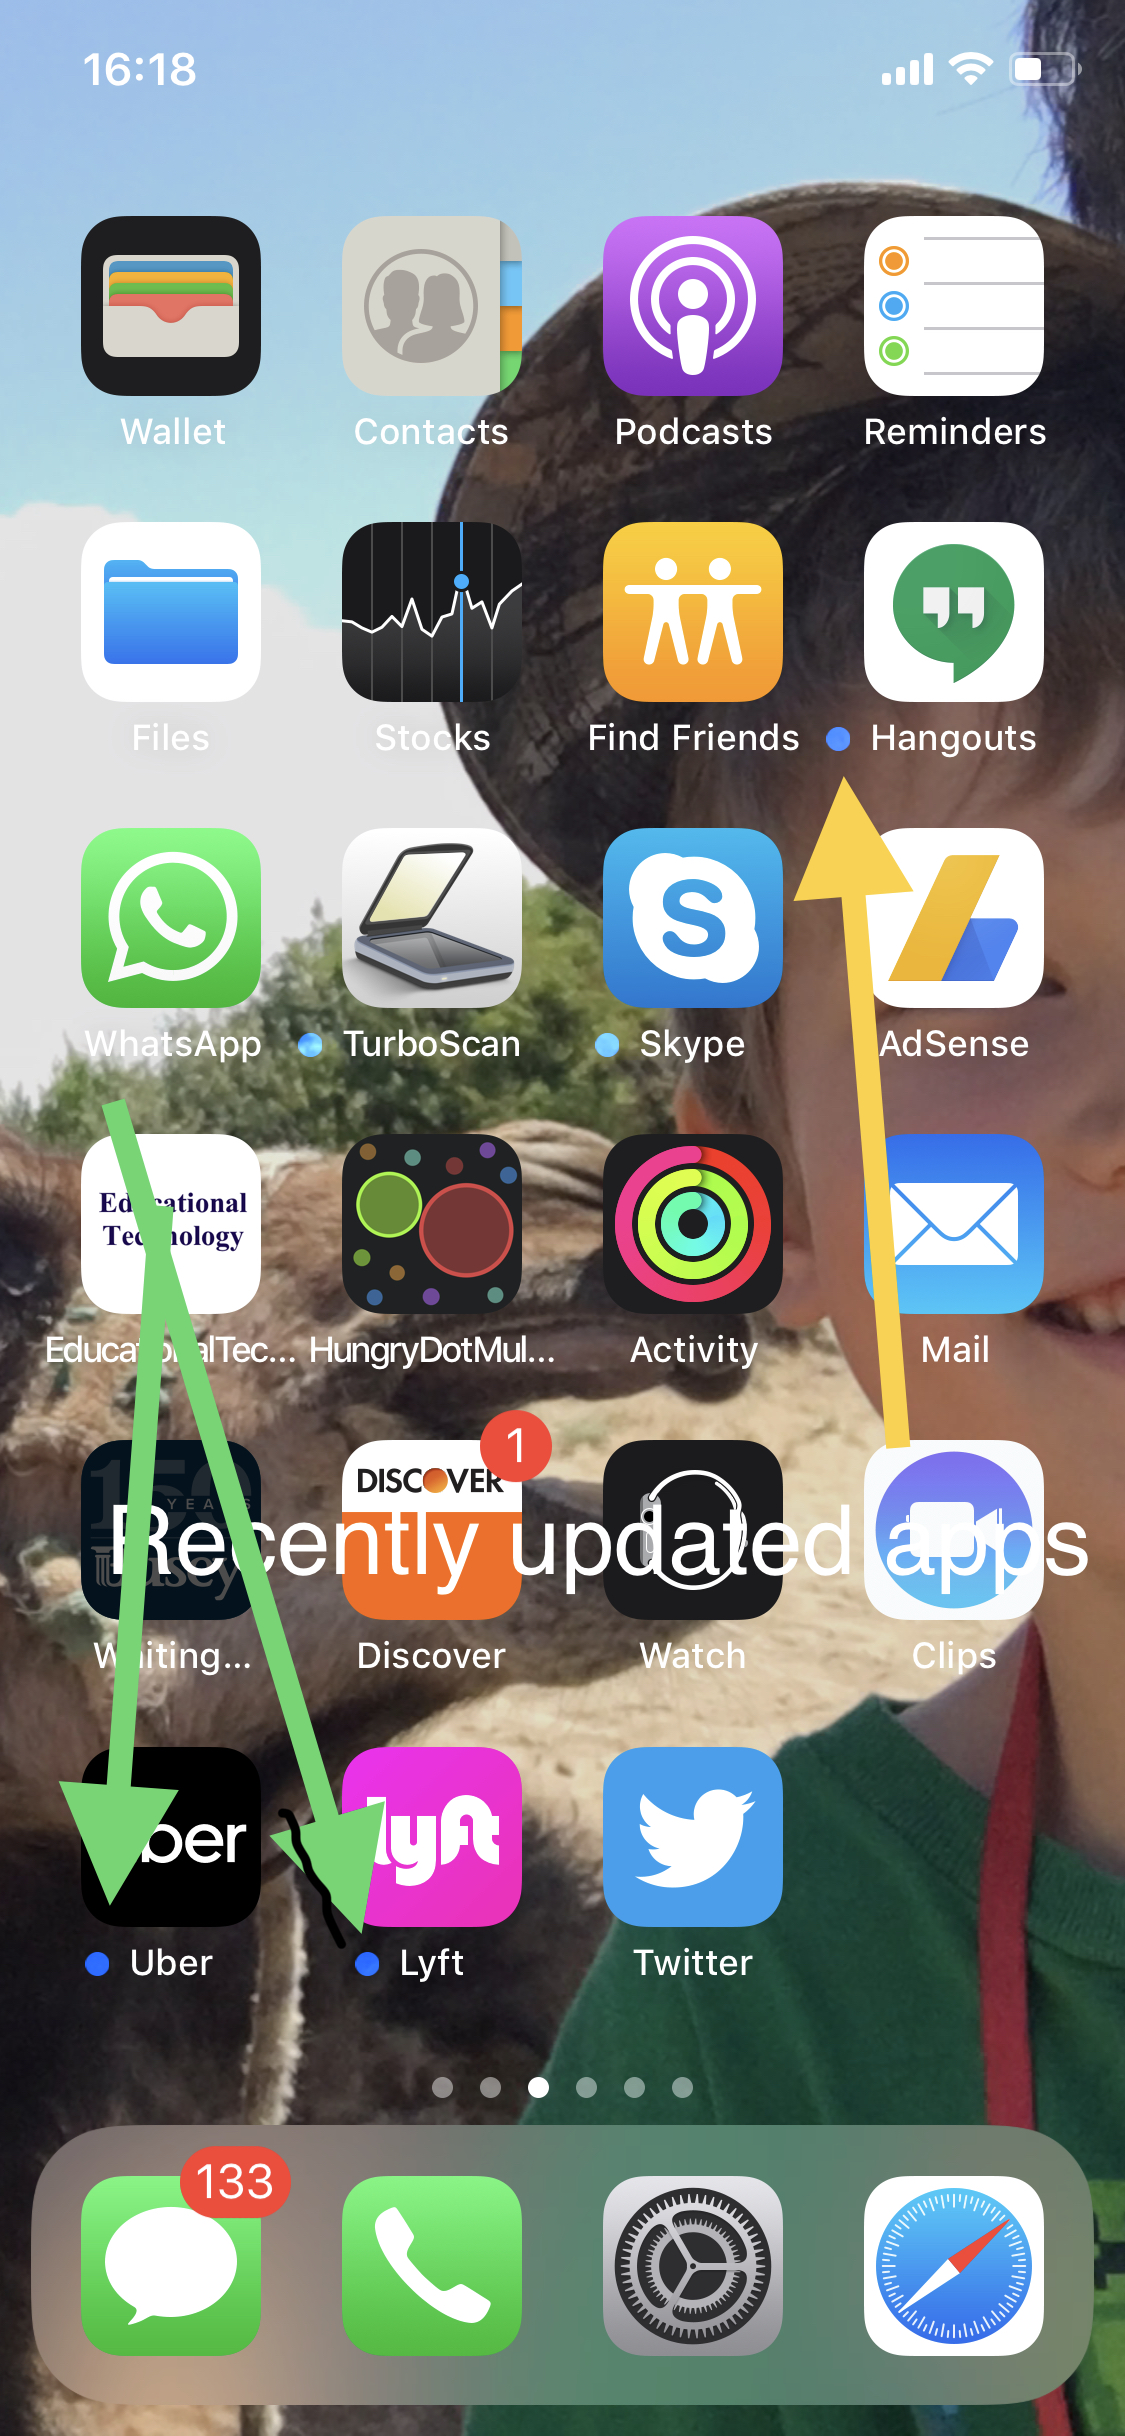 What Does Blue Dot Mean On My Home Screen Macreports - roblox symbols next to names meaning